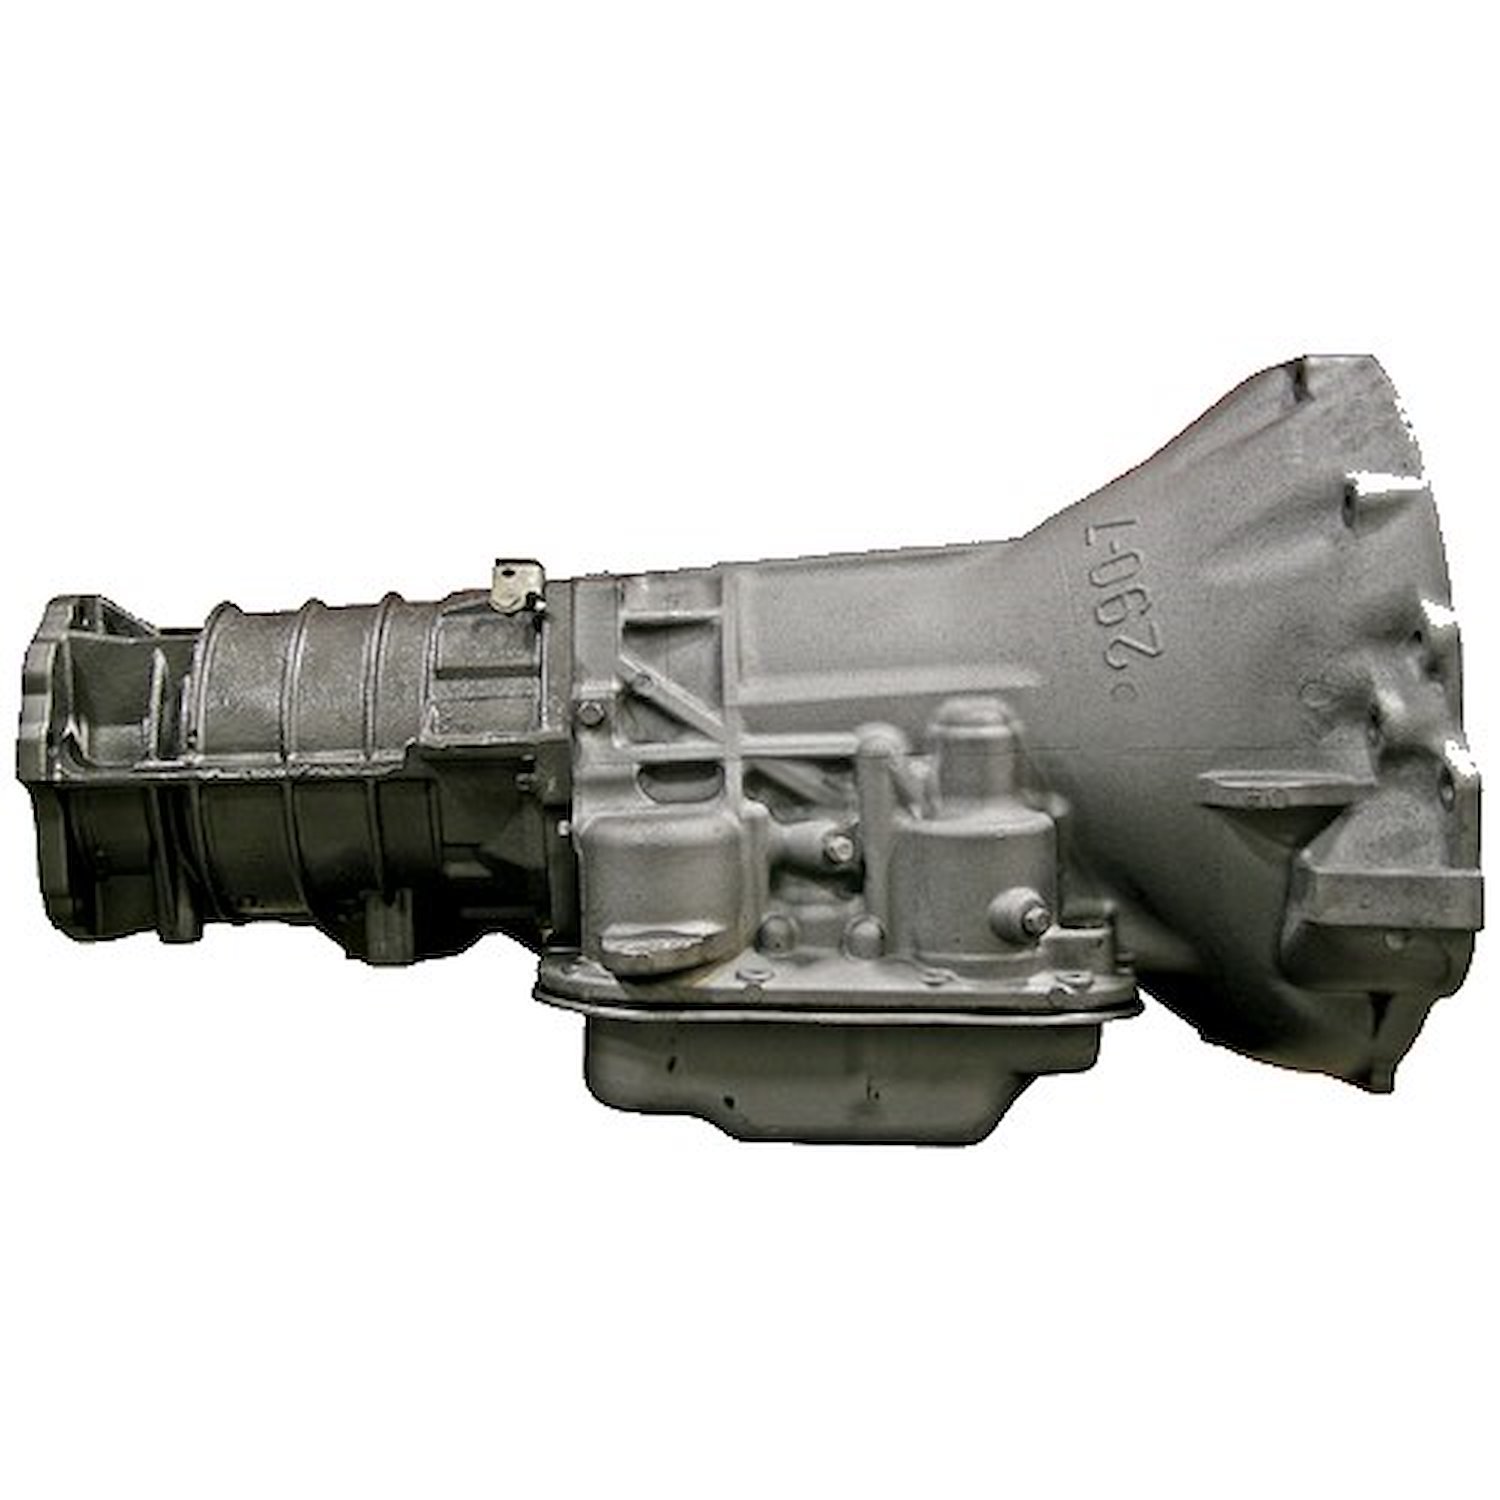 42RE Reman Auto Trans Fits 1996-1998 Jeep Grand Cherokee w/4.0L 242 6cyl. Eng. [4WD]